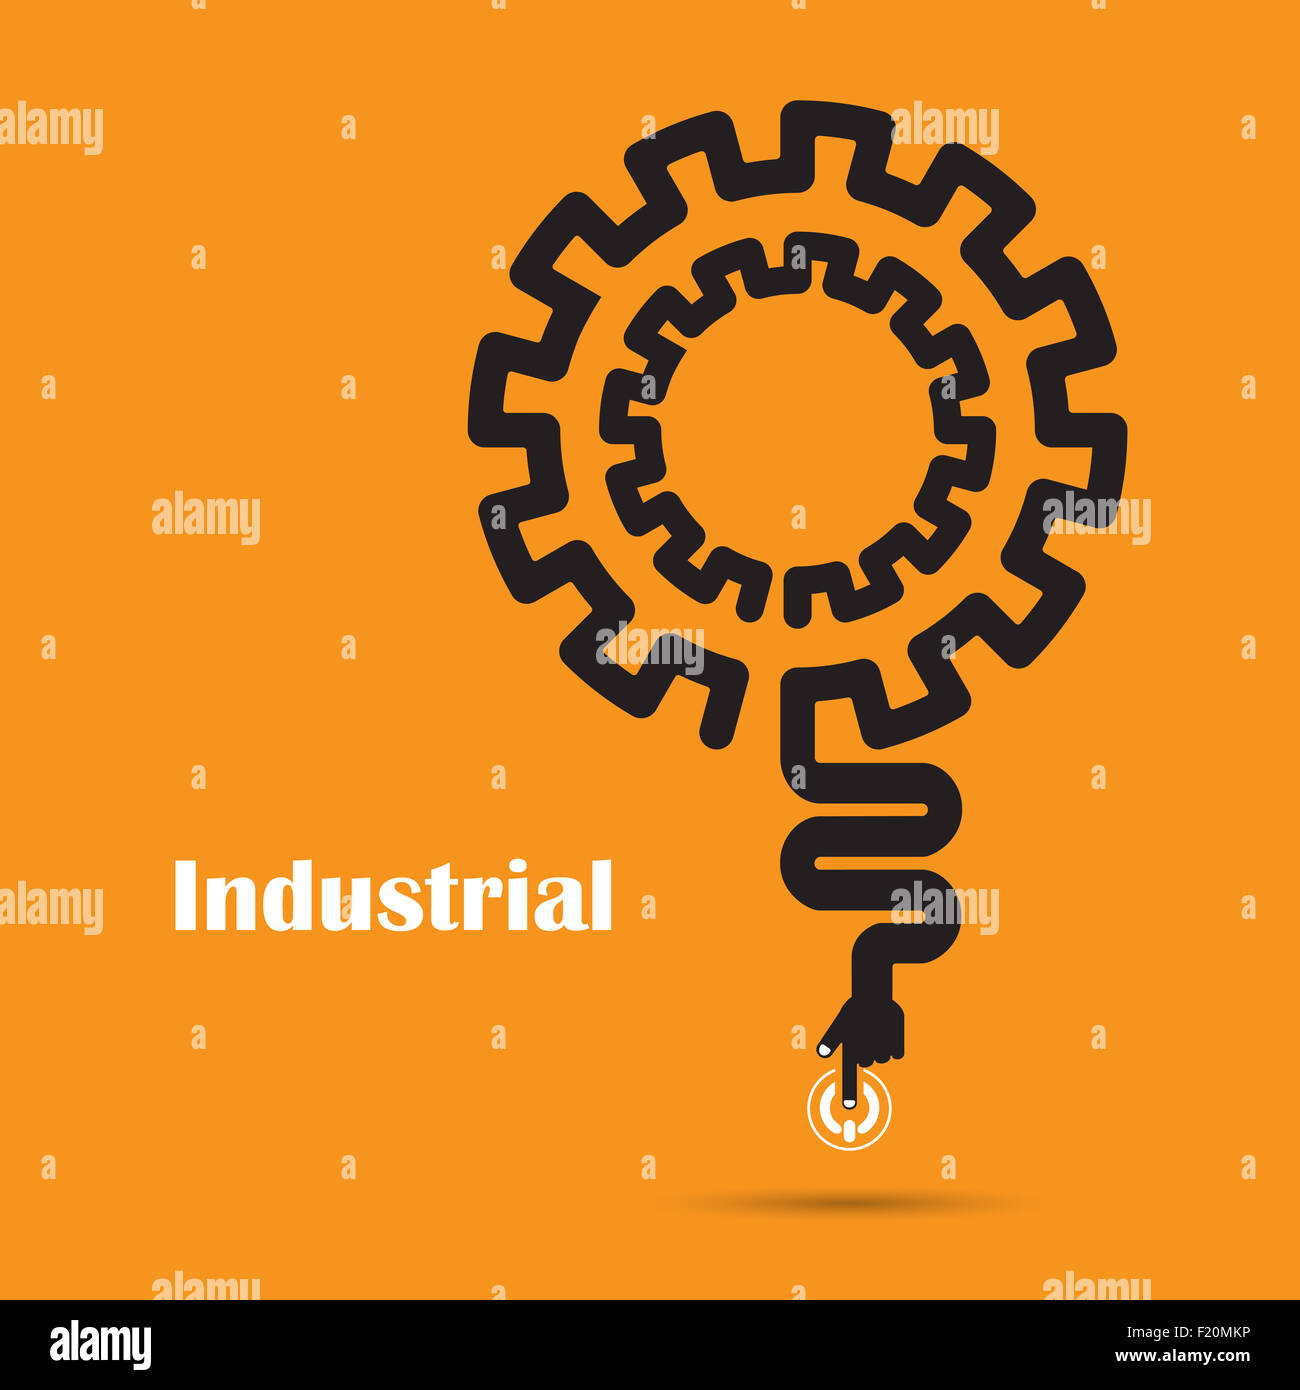 Industrial concept.Creative industrial abstract logo design template. Corporate business industrial creative logotype Stock Photo